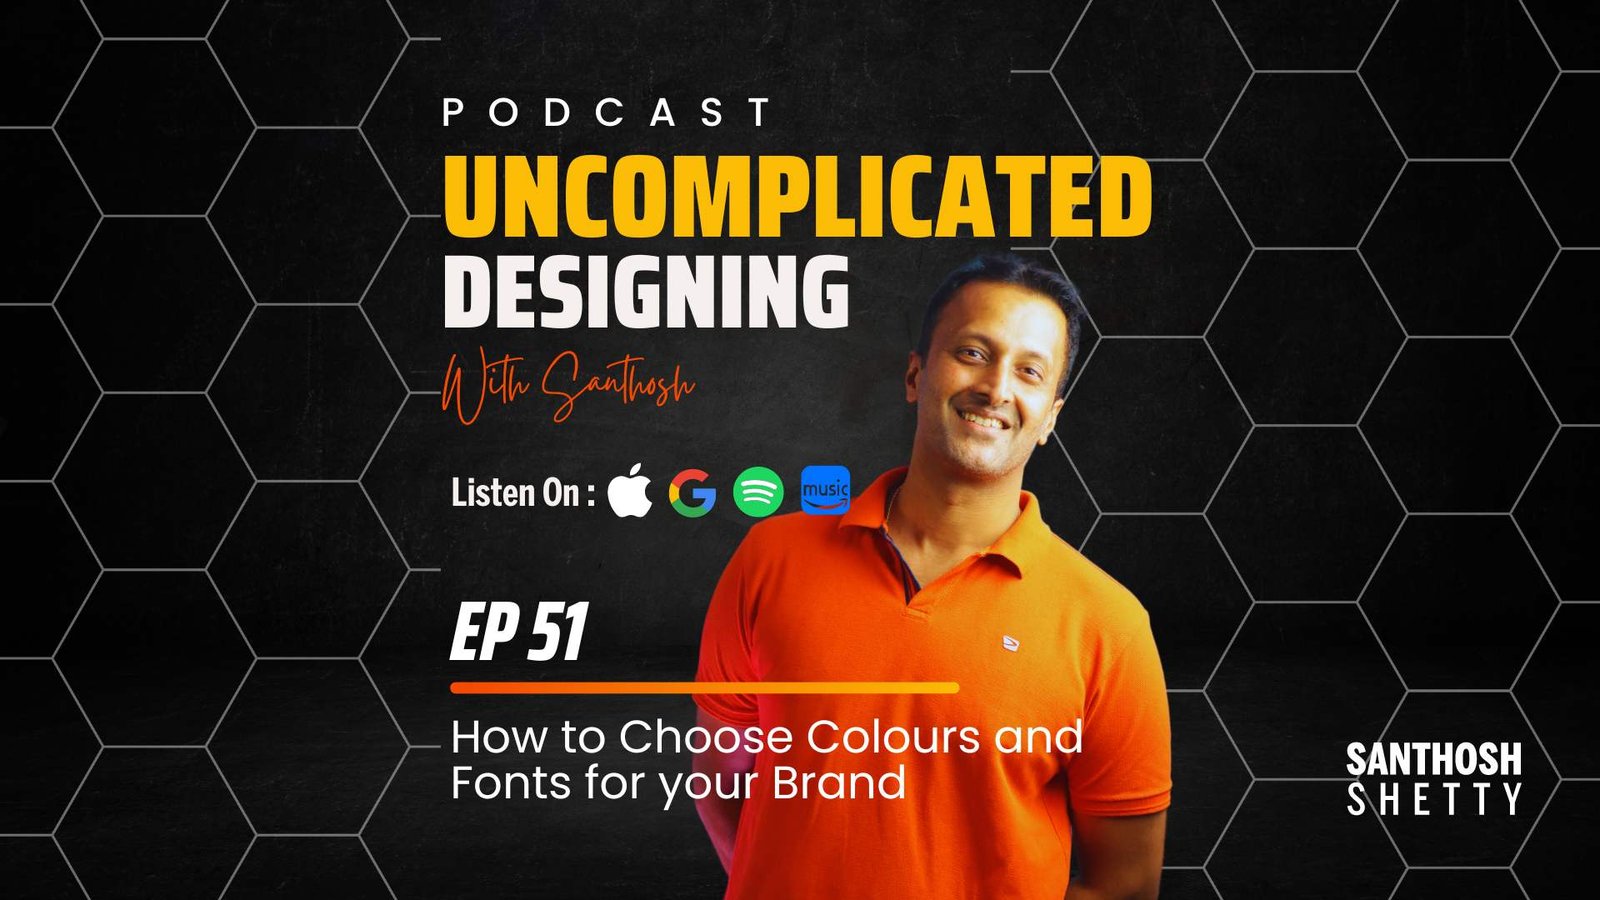 Uncomplicated Designing Podcast - EP50 - How to Choose Colours and Fonts for your Brand (2)